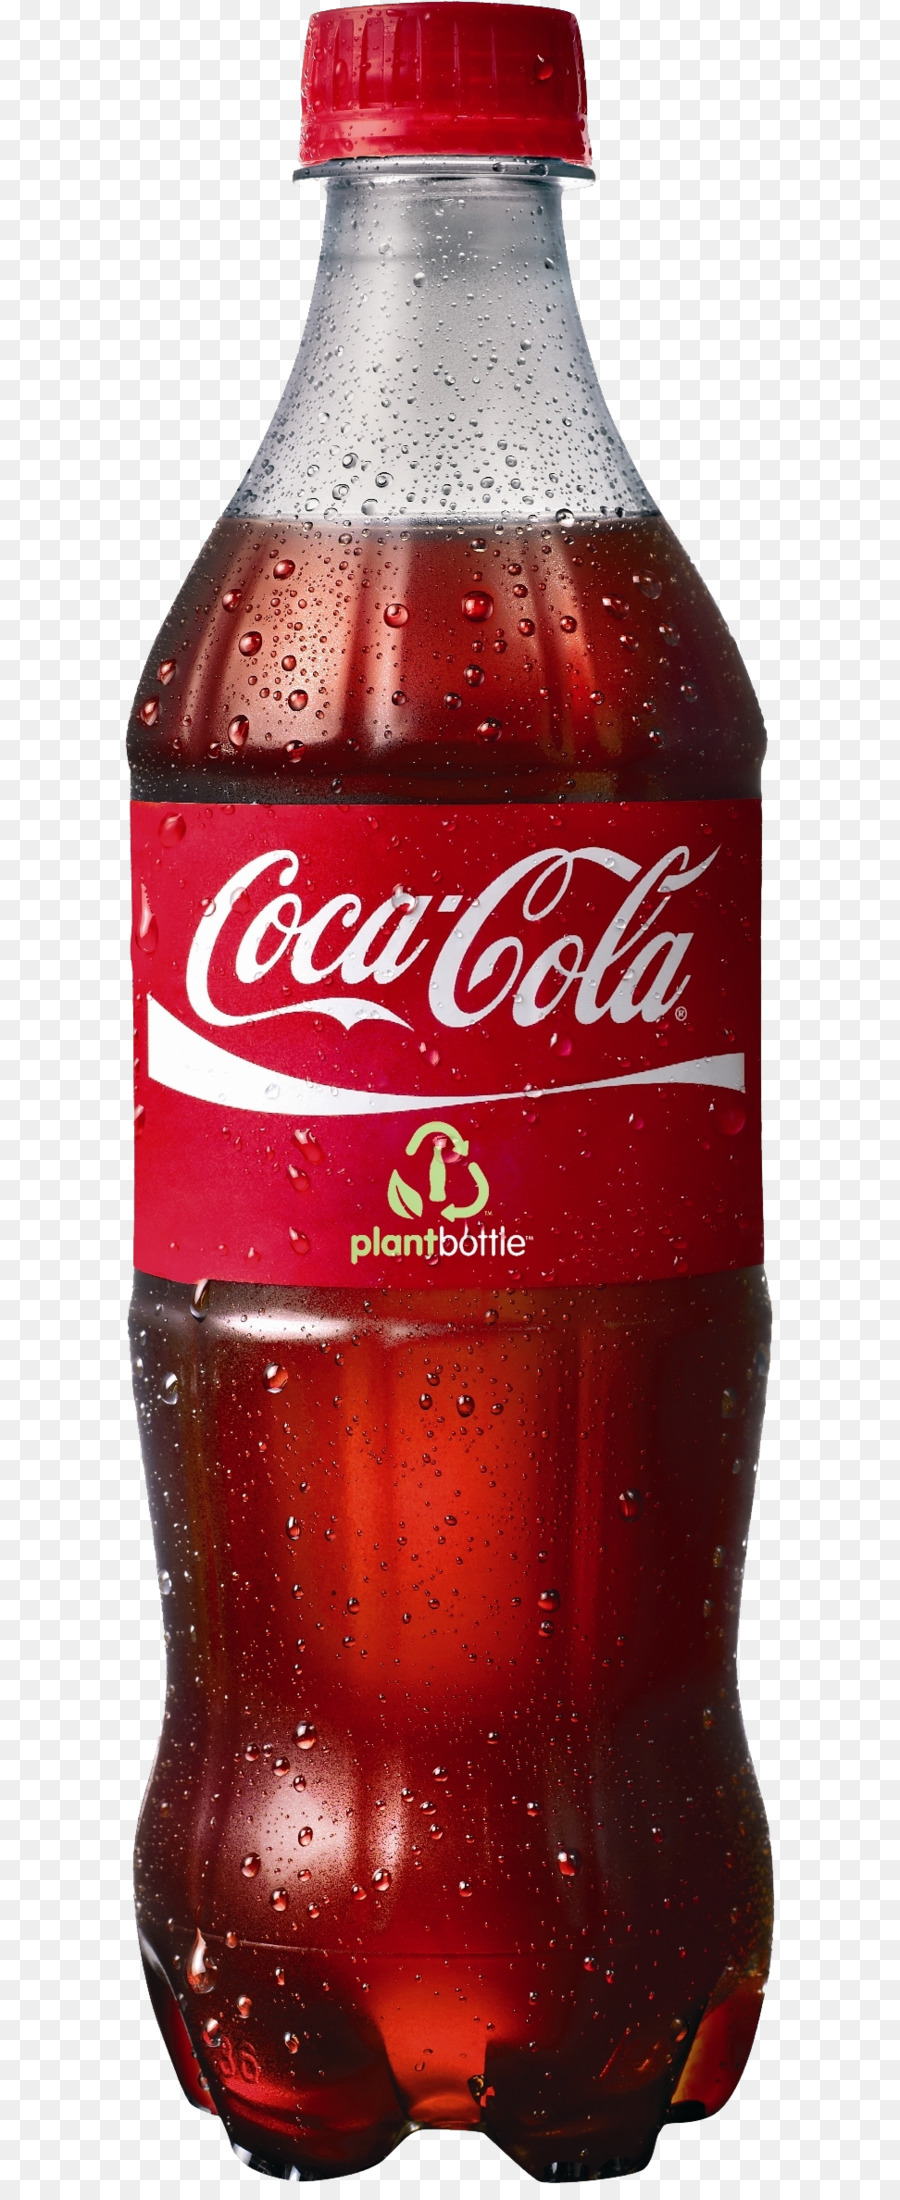 Coca-Cola Sony Xperia M2 Glass bottle Sony Mobile - Coca cola bottle PNG image png download - 702*2359 - Free Transparent Coca Cola png Download.